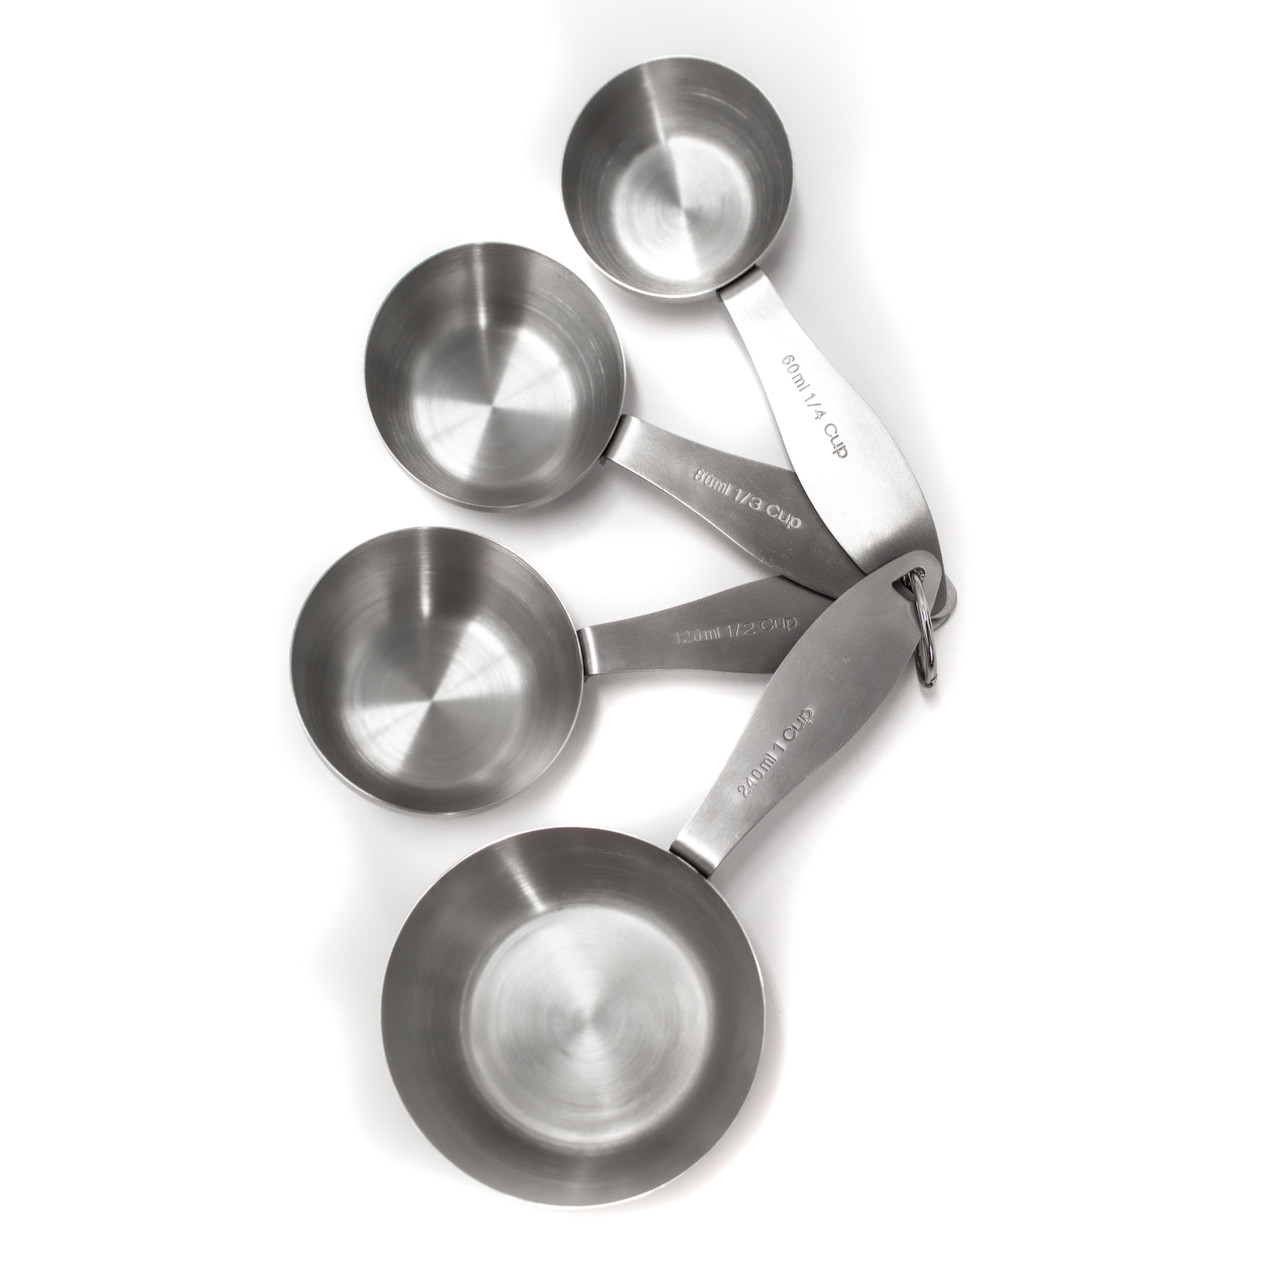 BergHOFF 4pc Stainless Steel Measuring Cup Set